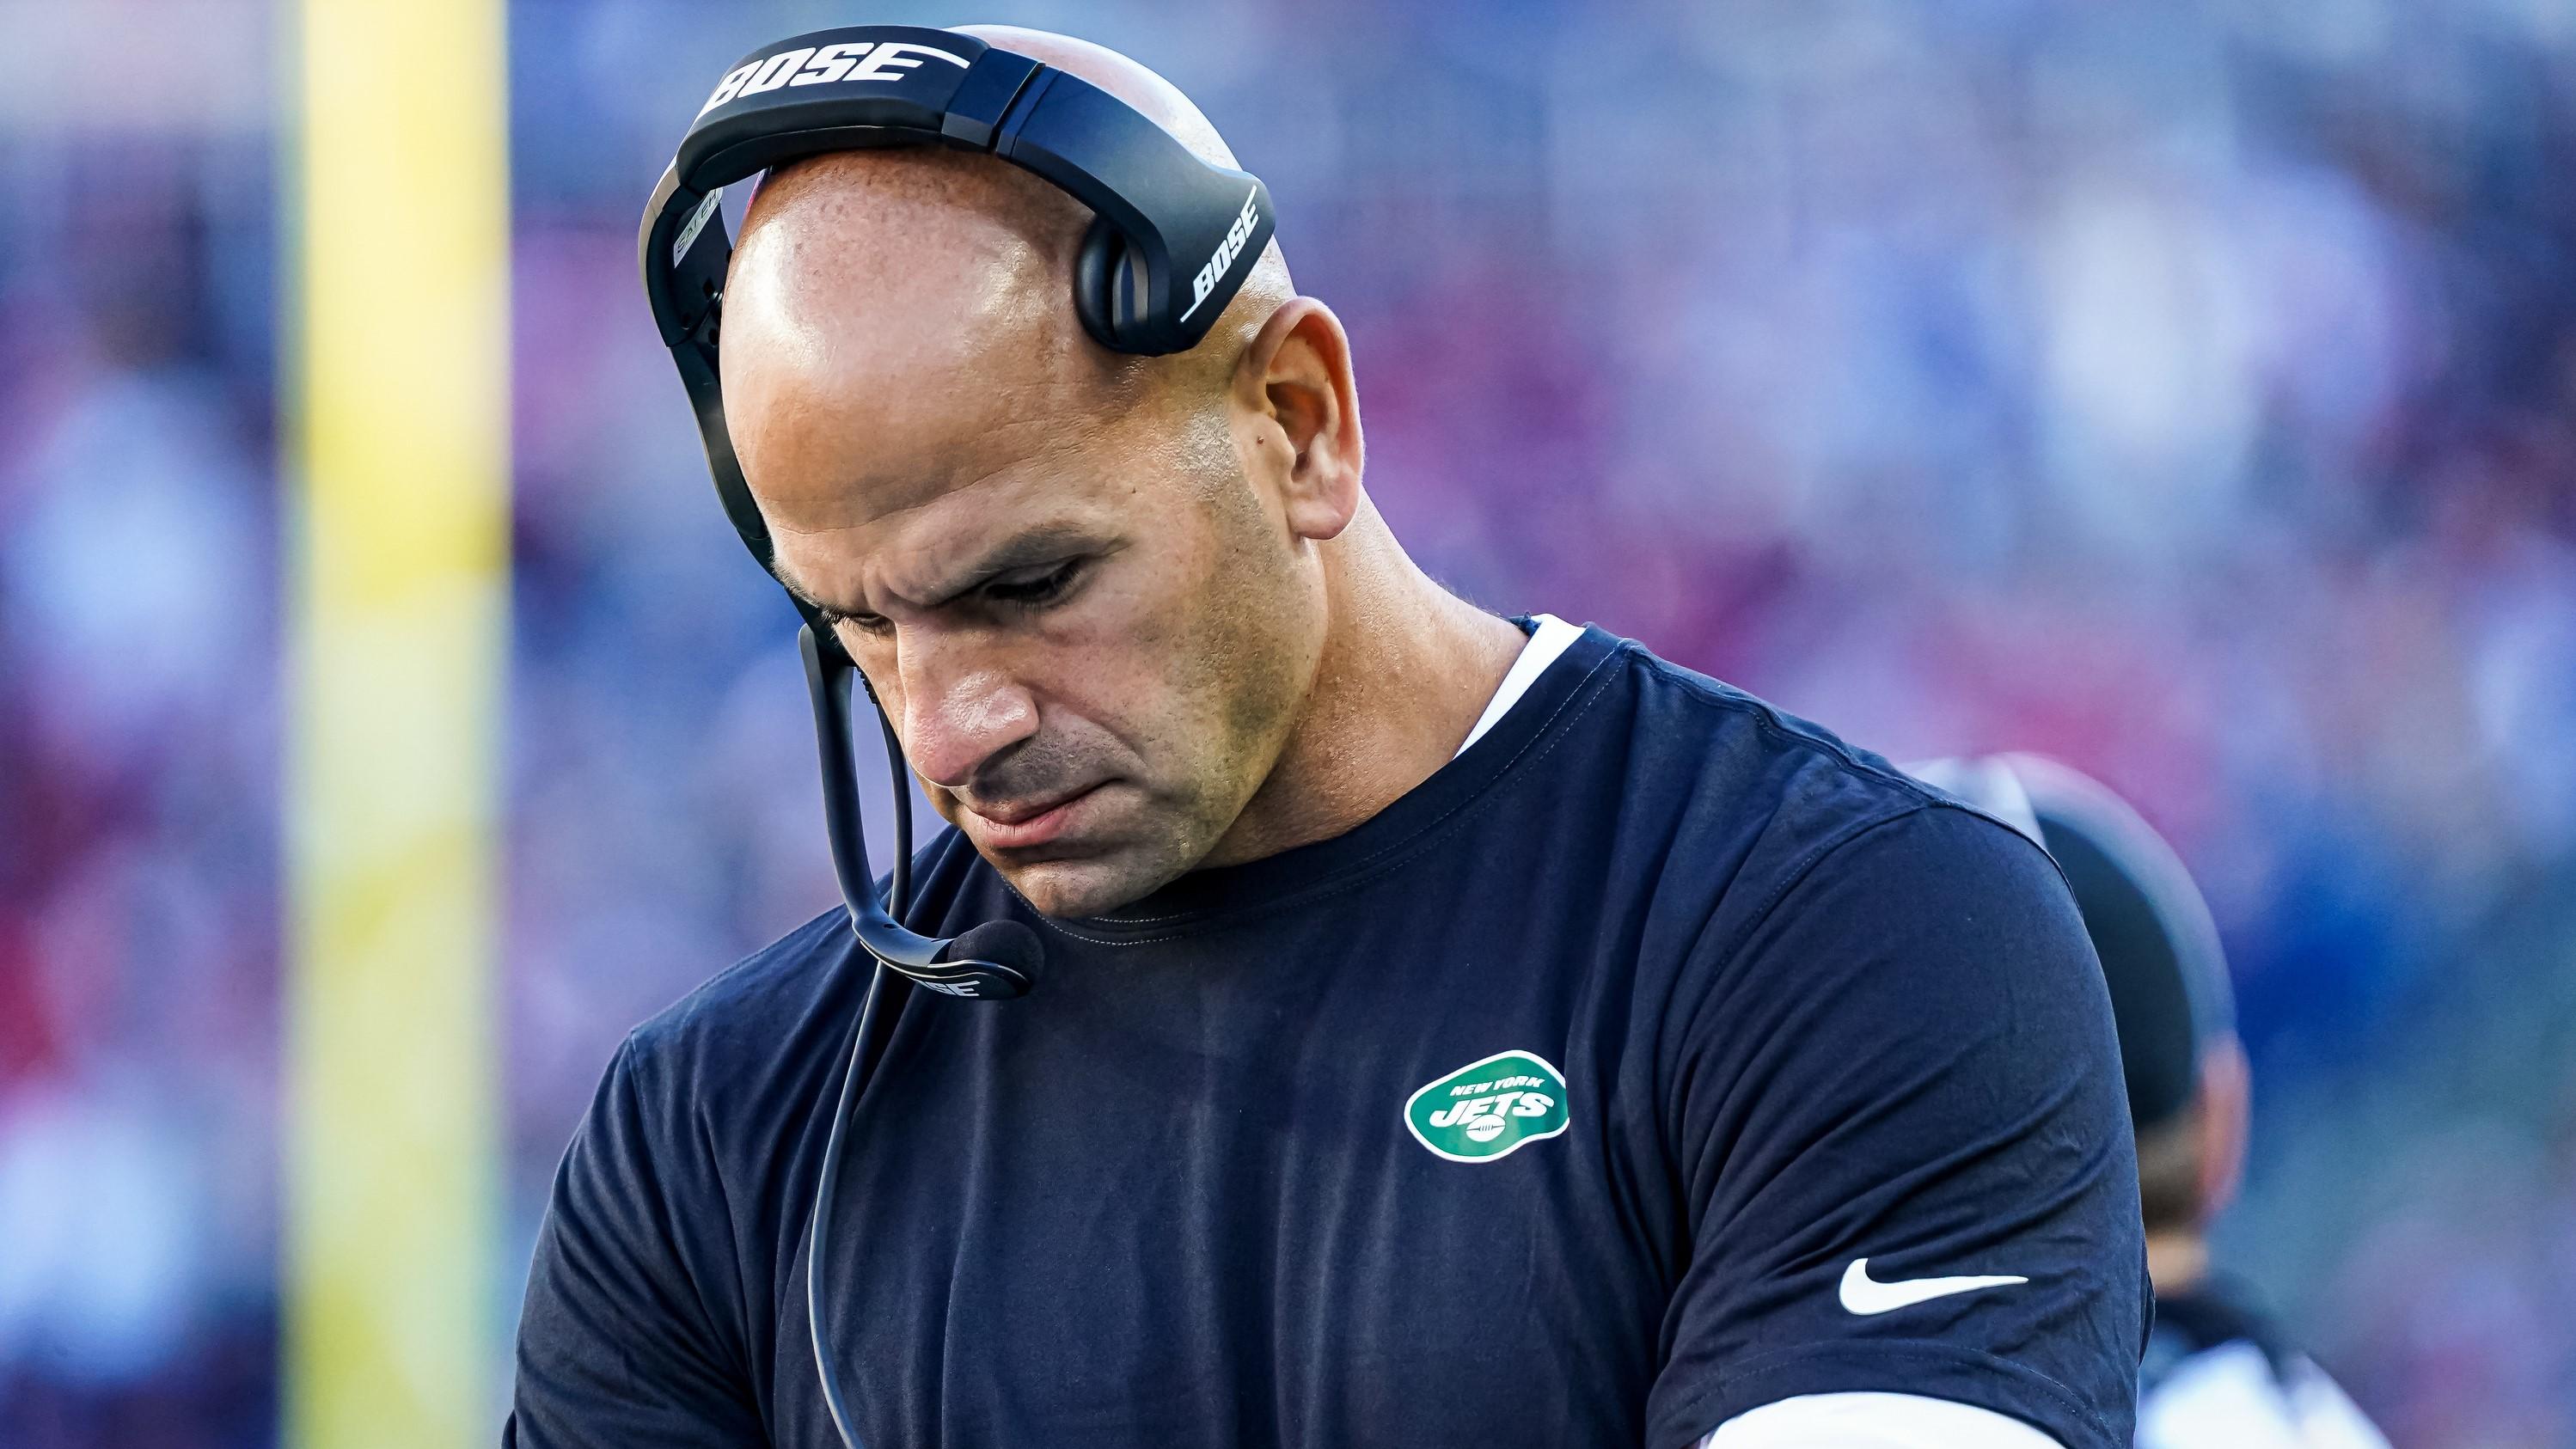 Oct 24, 2021; Foxborough, Massachusetts, USA; New York Jets head coach Robert Saleh watches from the sideline against the New England Patriots in the second half at Gillette Stadium. Mandatory Credit: David Butler II-USA TODAY Sports / David Butler II-USA TODAY Sports